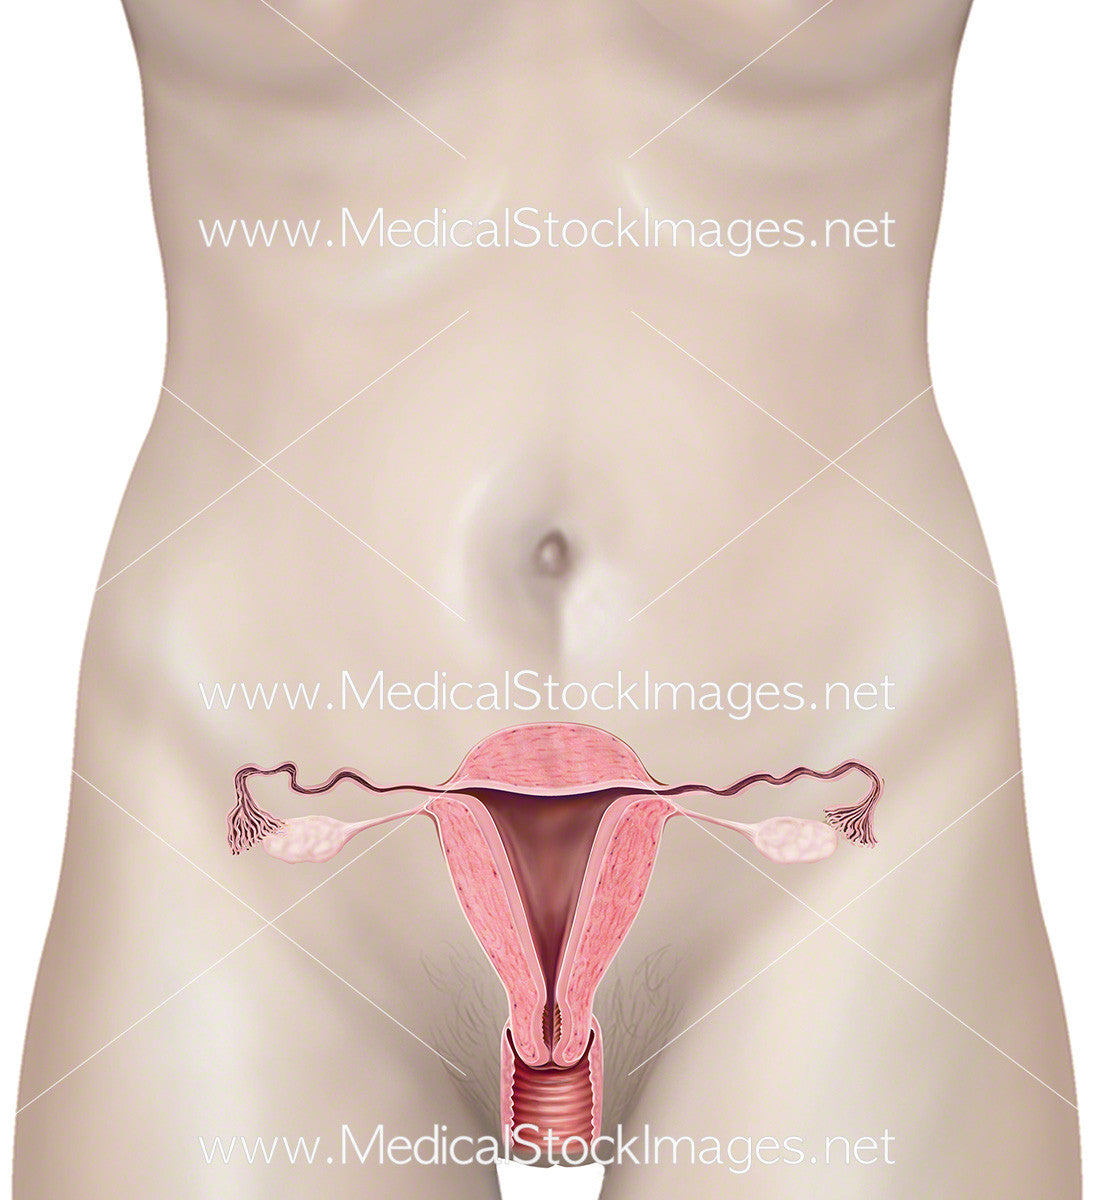 Uterus with Female Body – Medical Stock Images Company